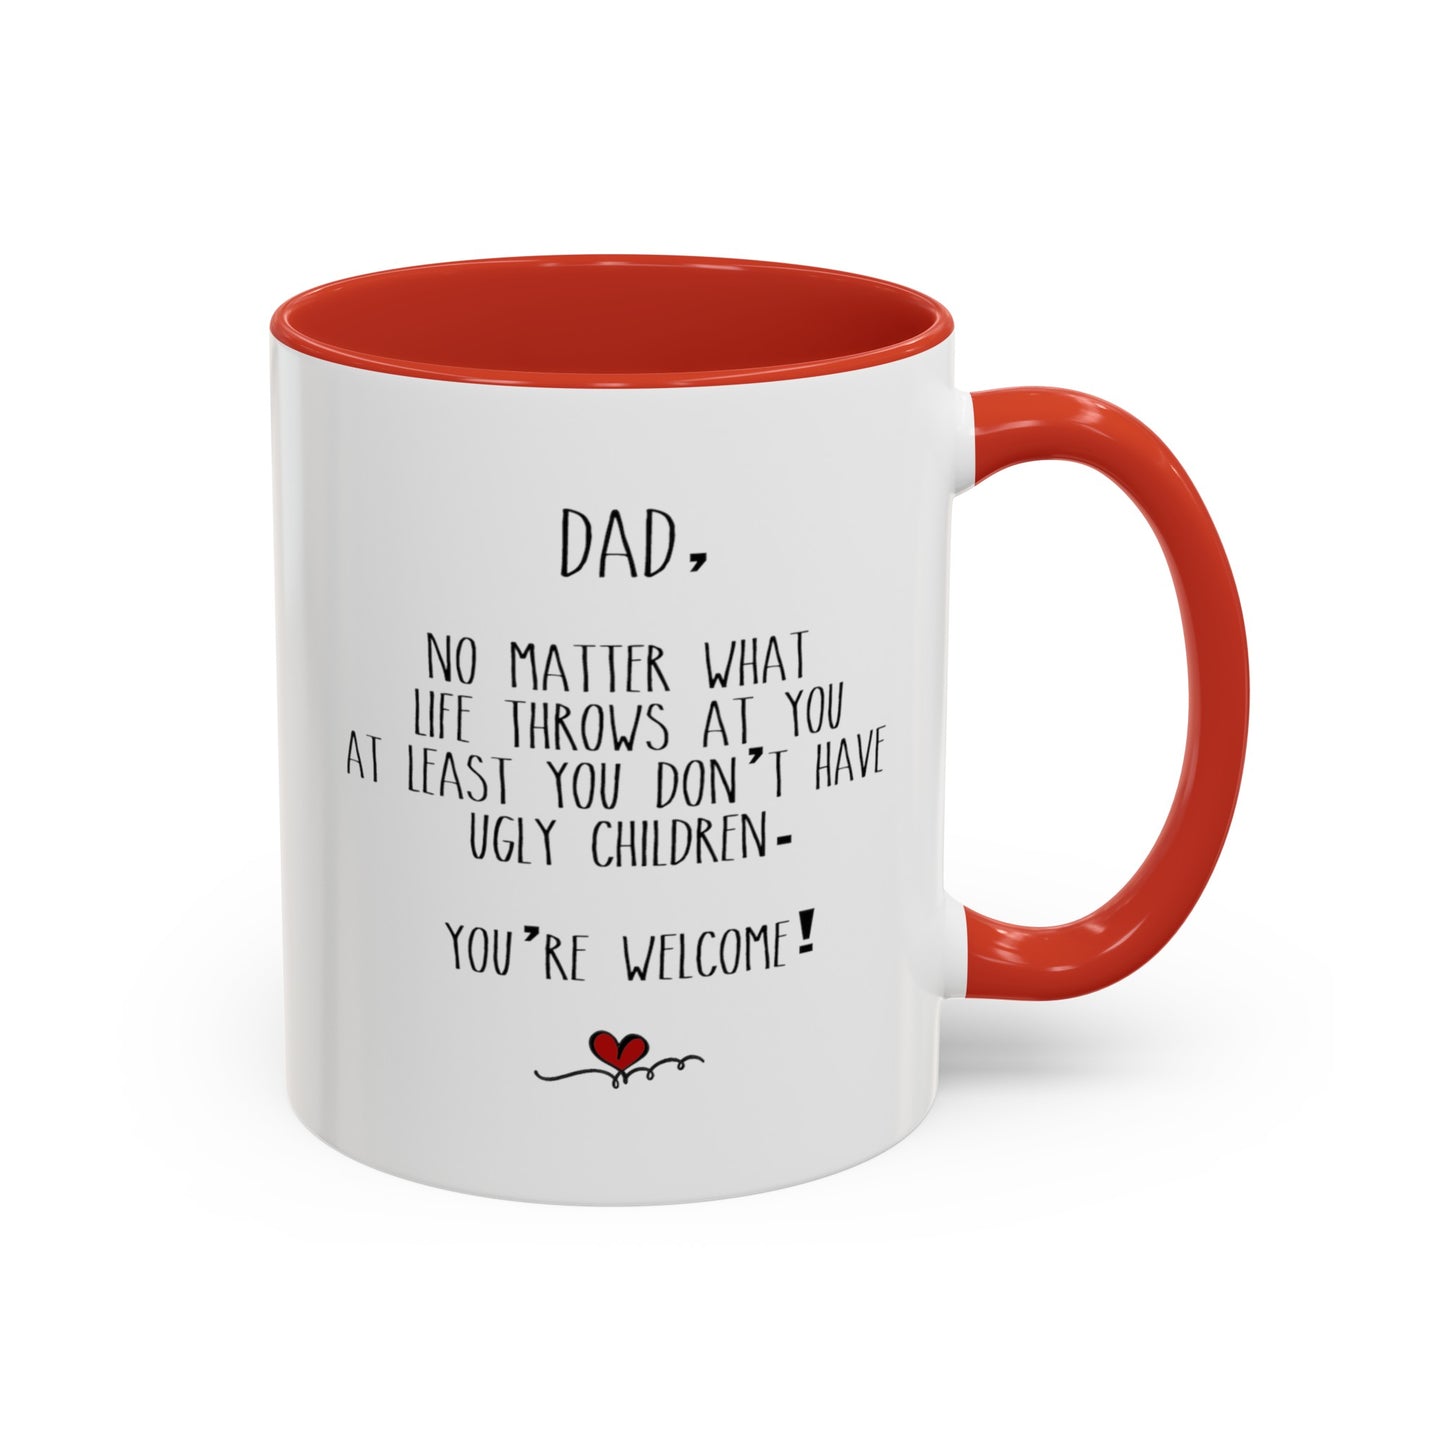 Hilarious Father's Day Mug - Funny Dad Gift - You're welcome